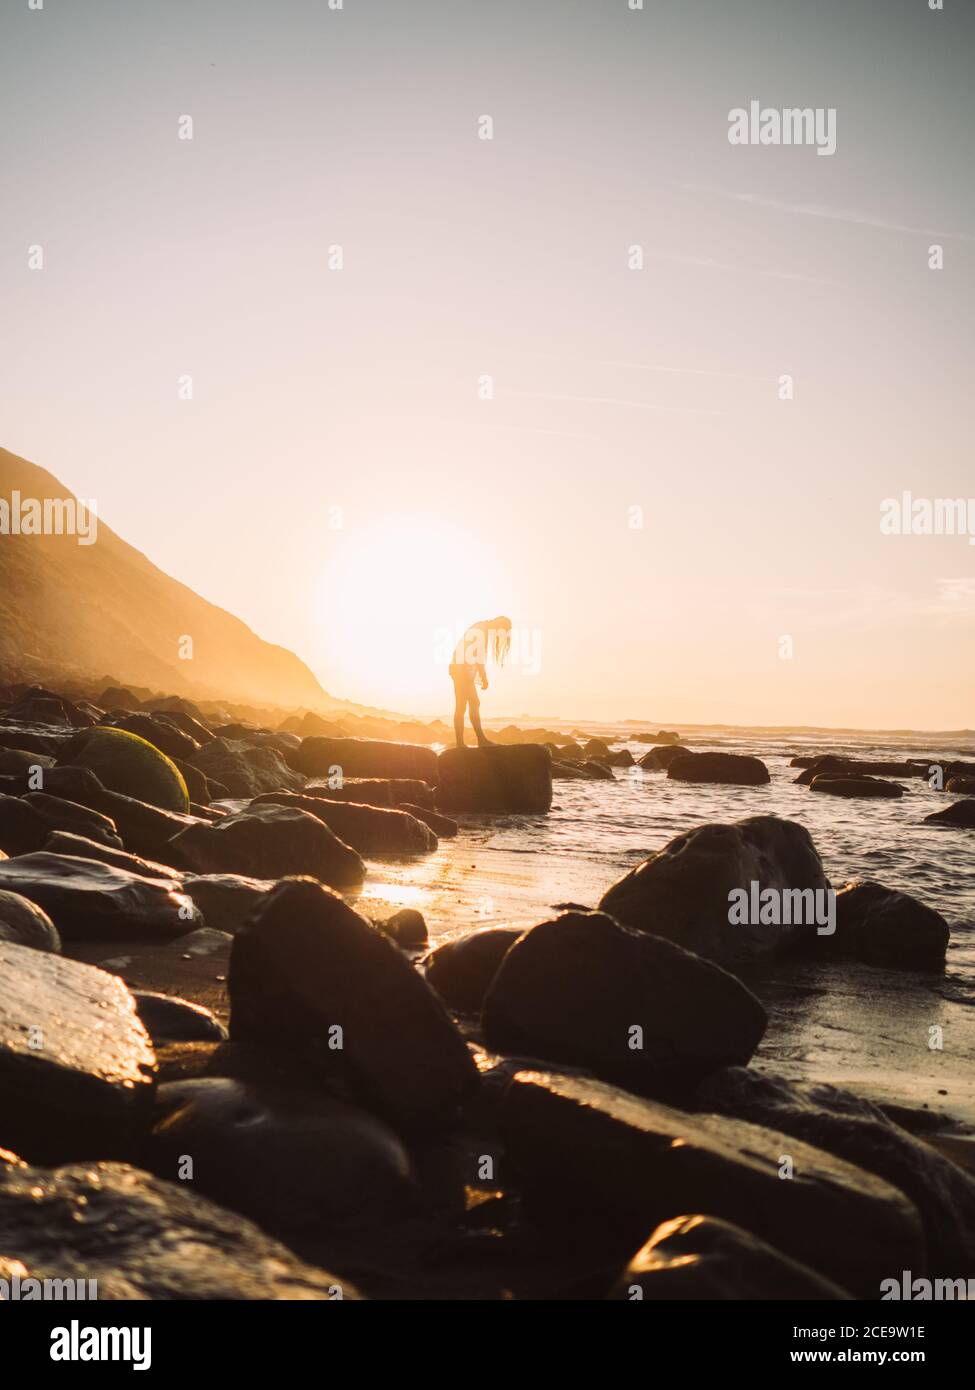 Female silhouette, standing on beach, with huge boulders coming out of sand, close up. Backlit. Stock Photo